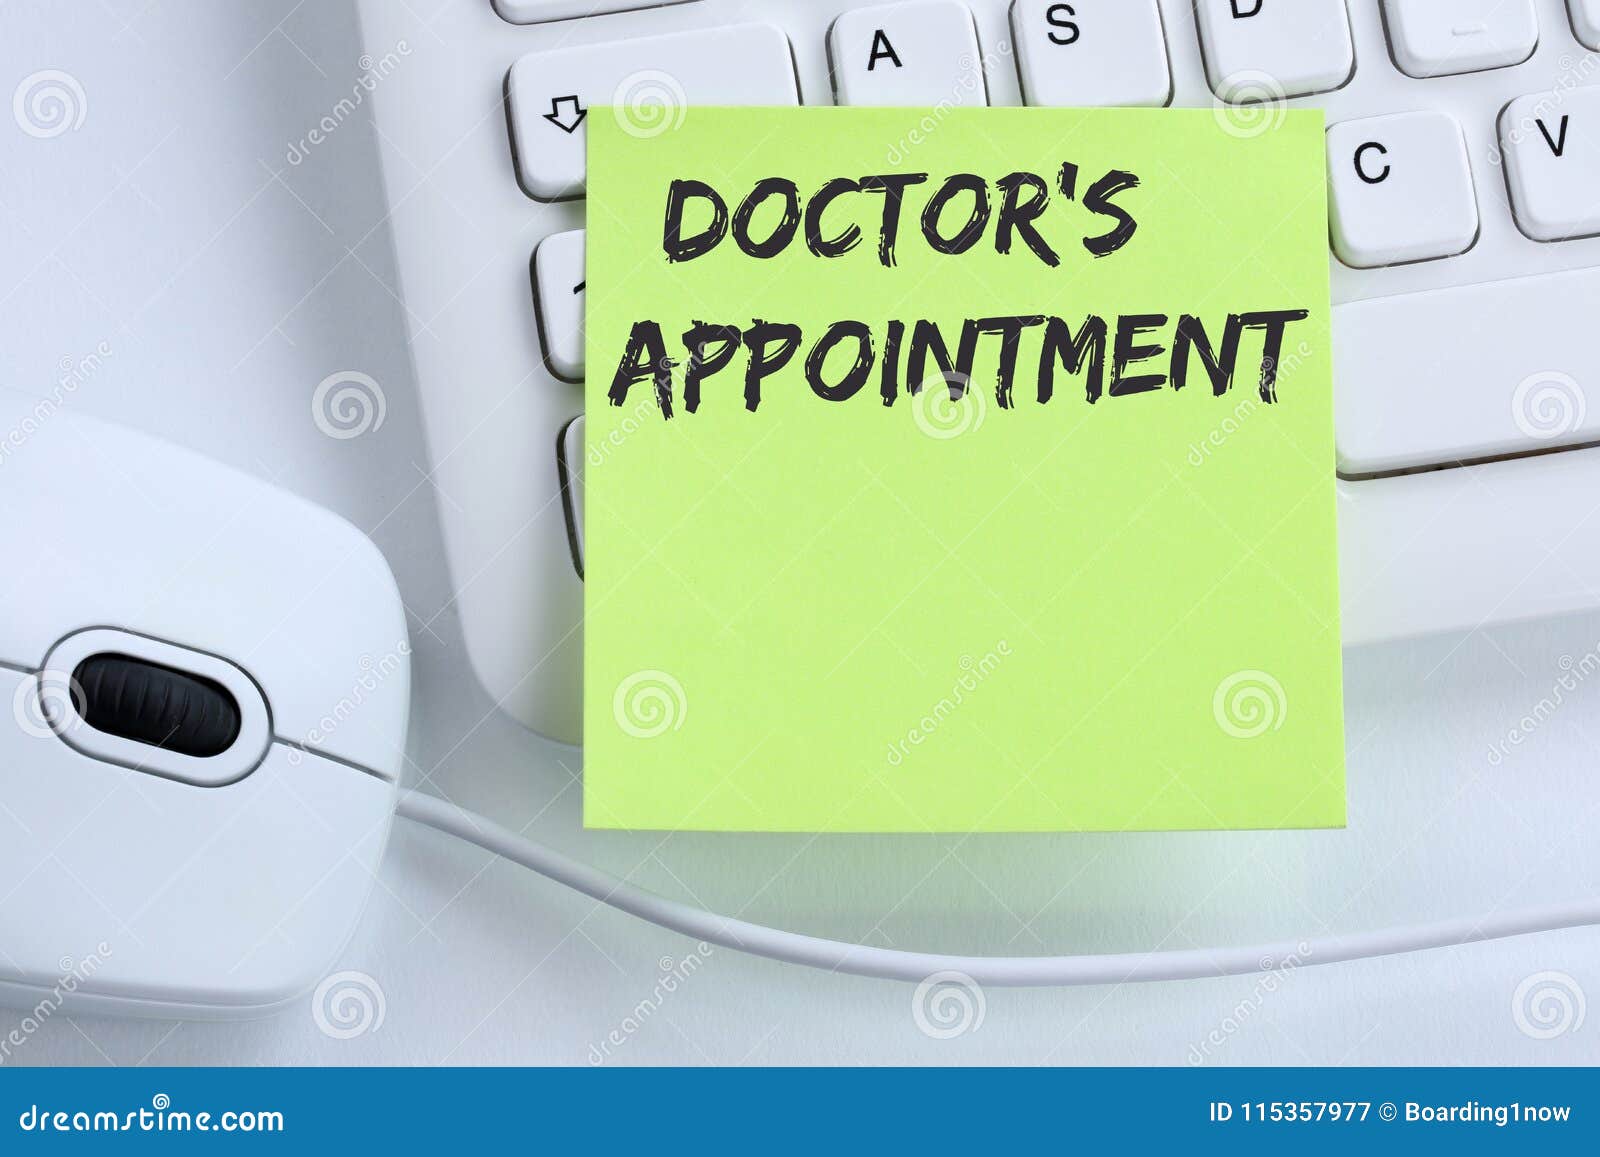 doctor`s medical appointment doctor medicine ill illness healthy